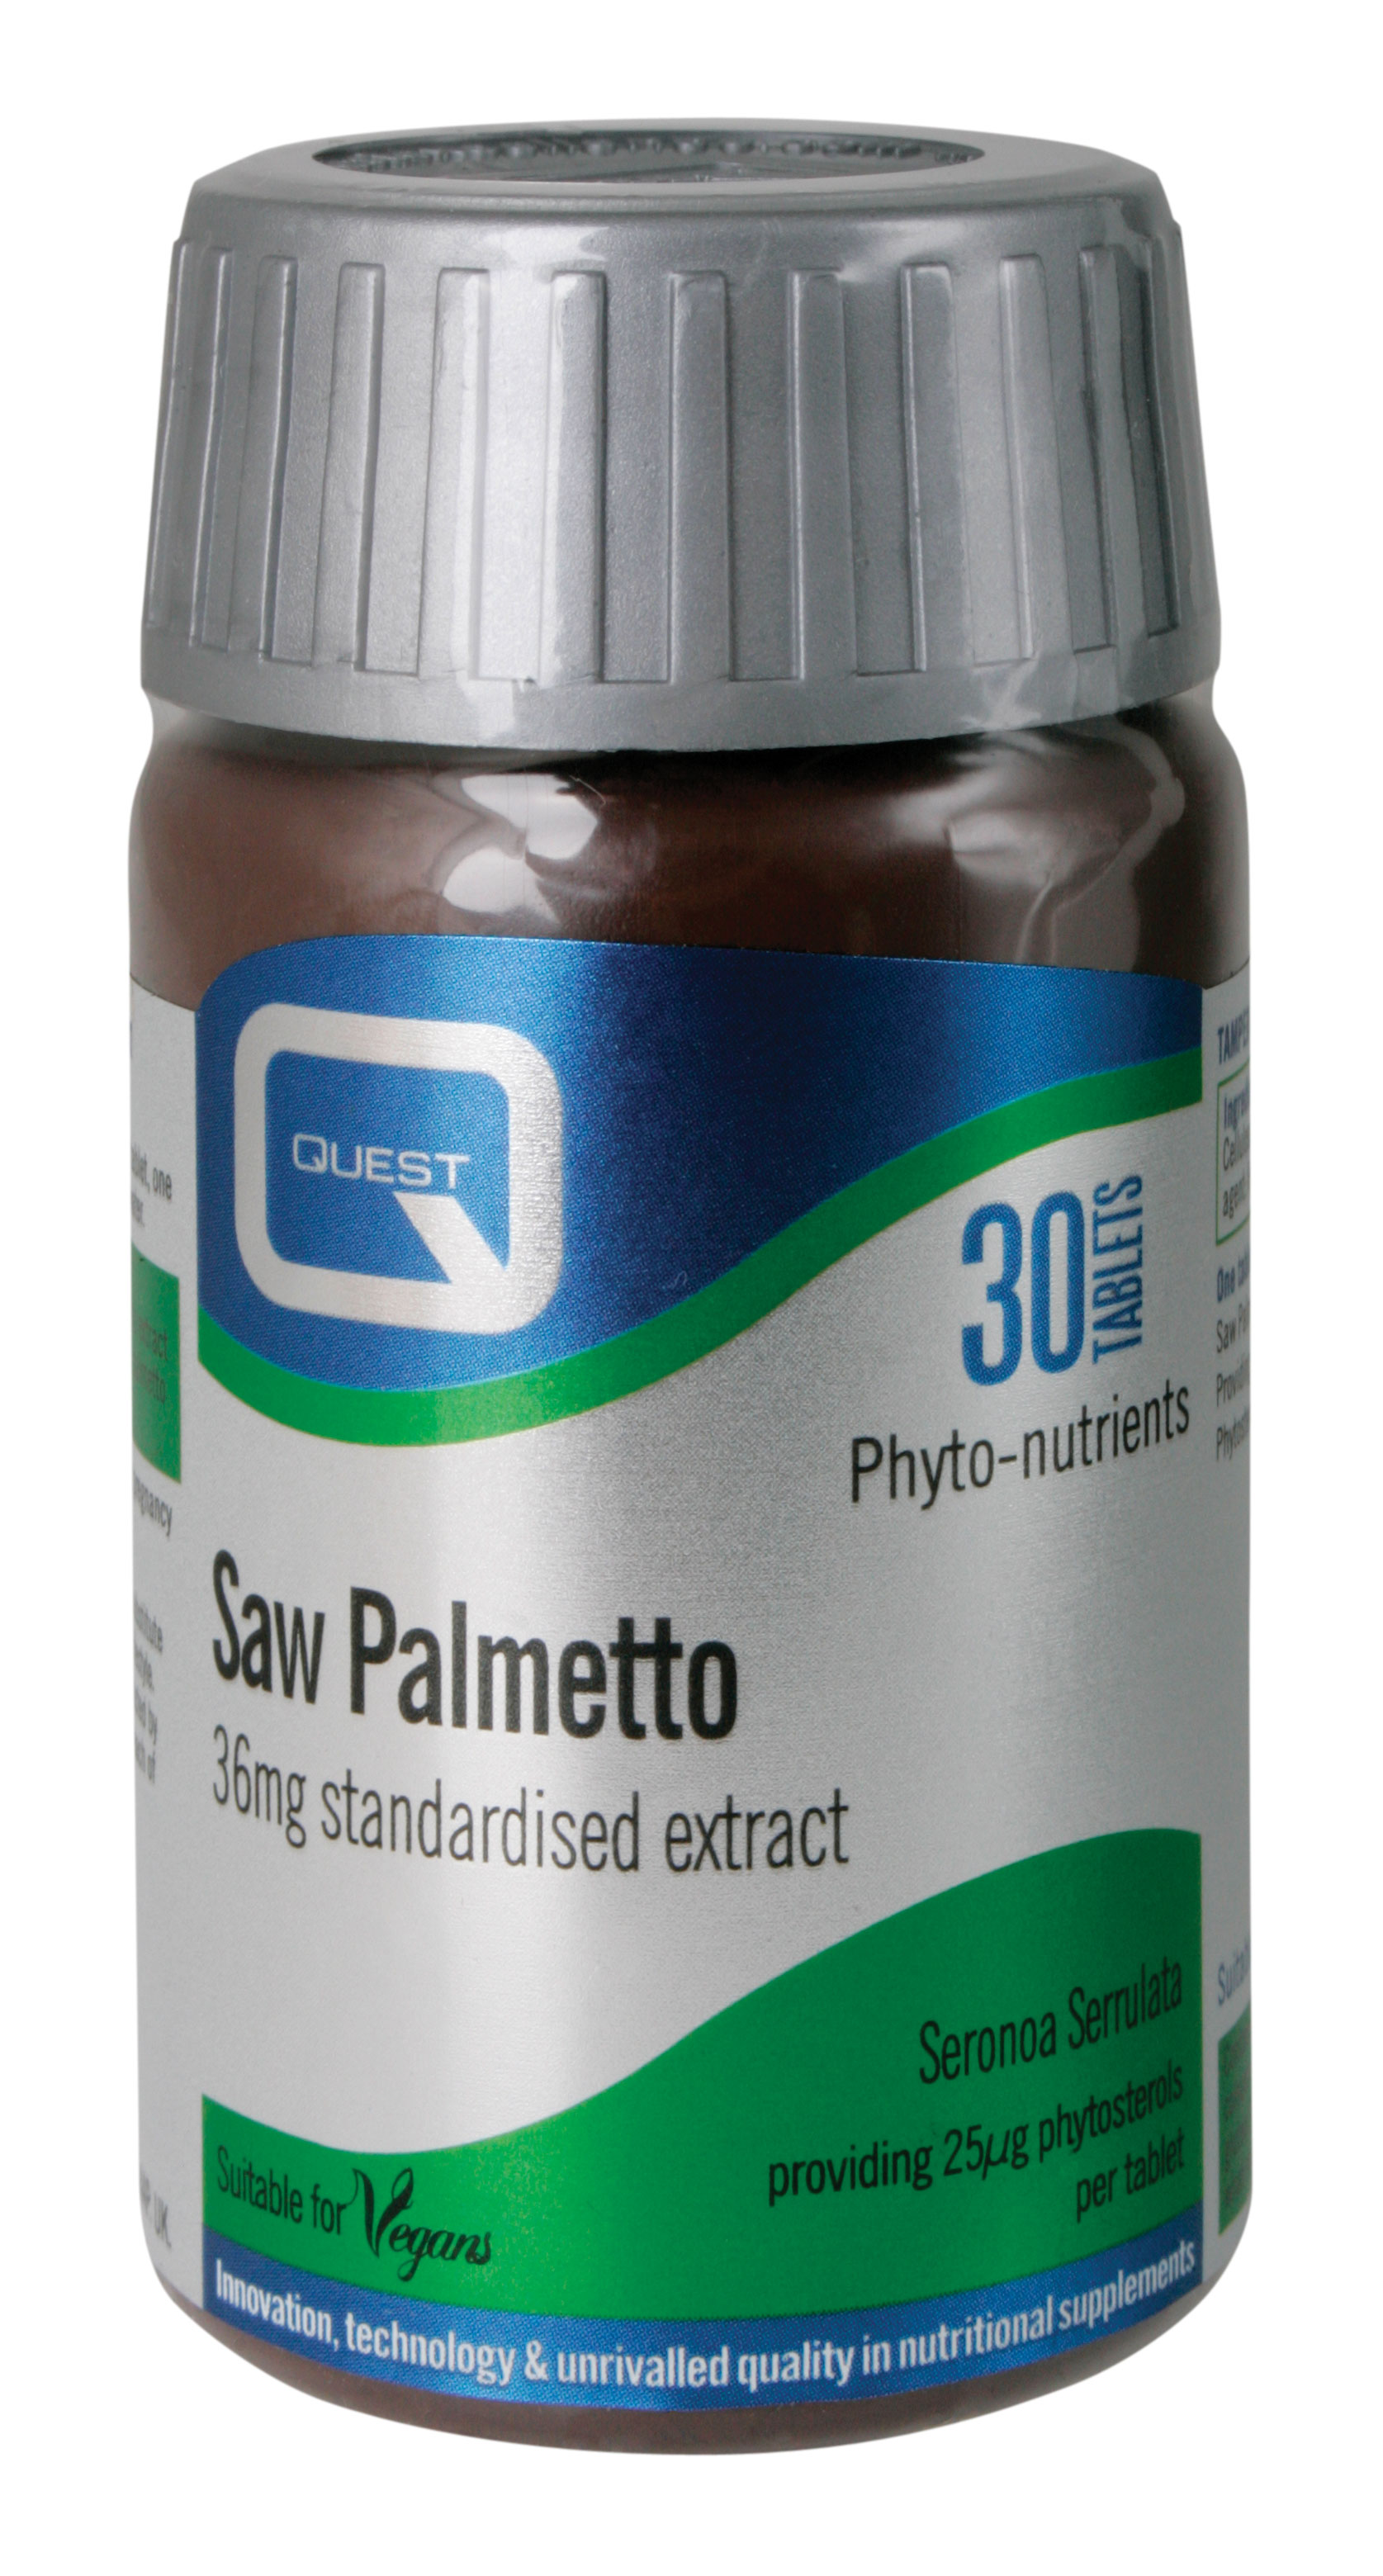 Saw Palmetto 36mg Extract 30's